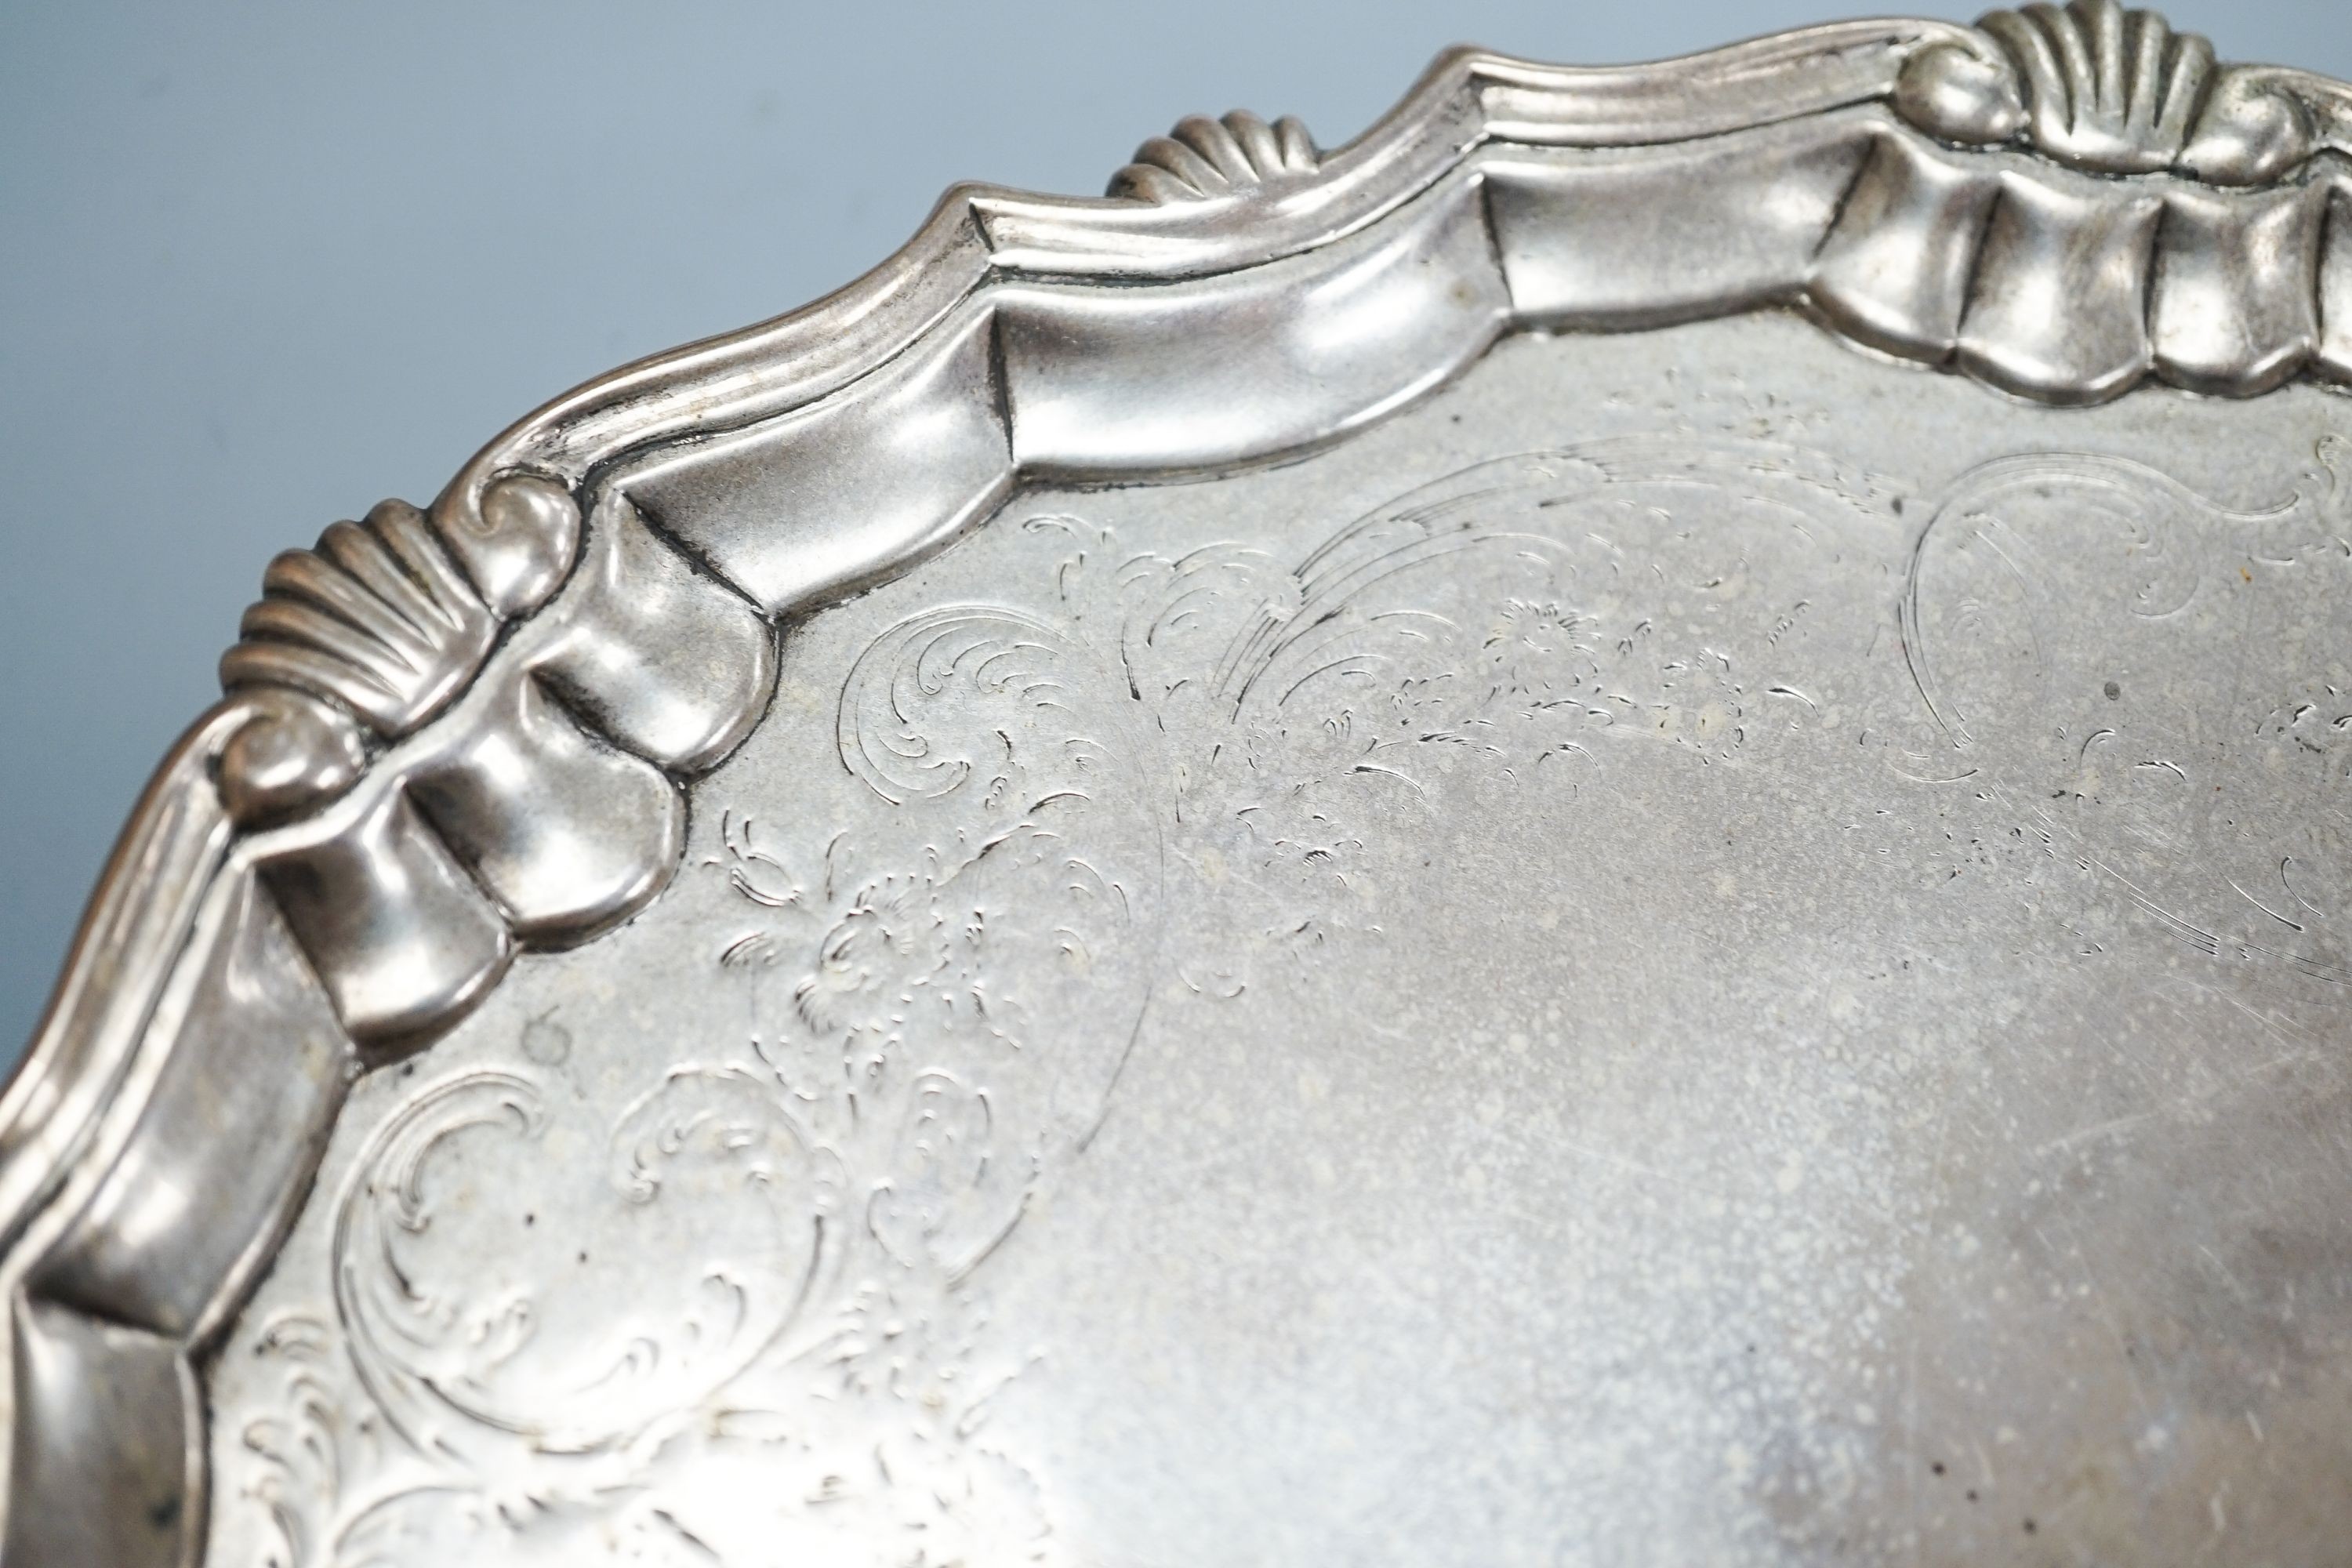 A George II silver waiter, with later engraved decoration, Robert Abercrombie, London, 1739, 20.7cm, 12.5oz.